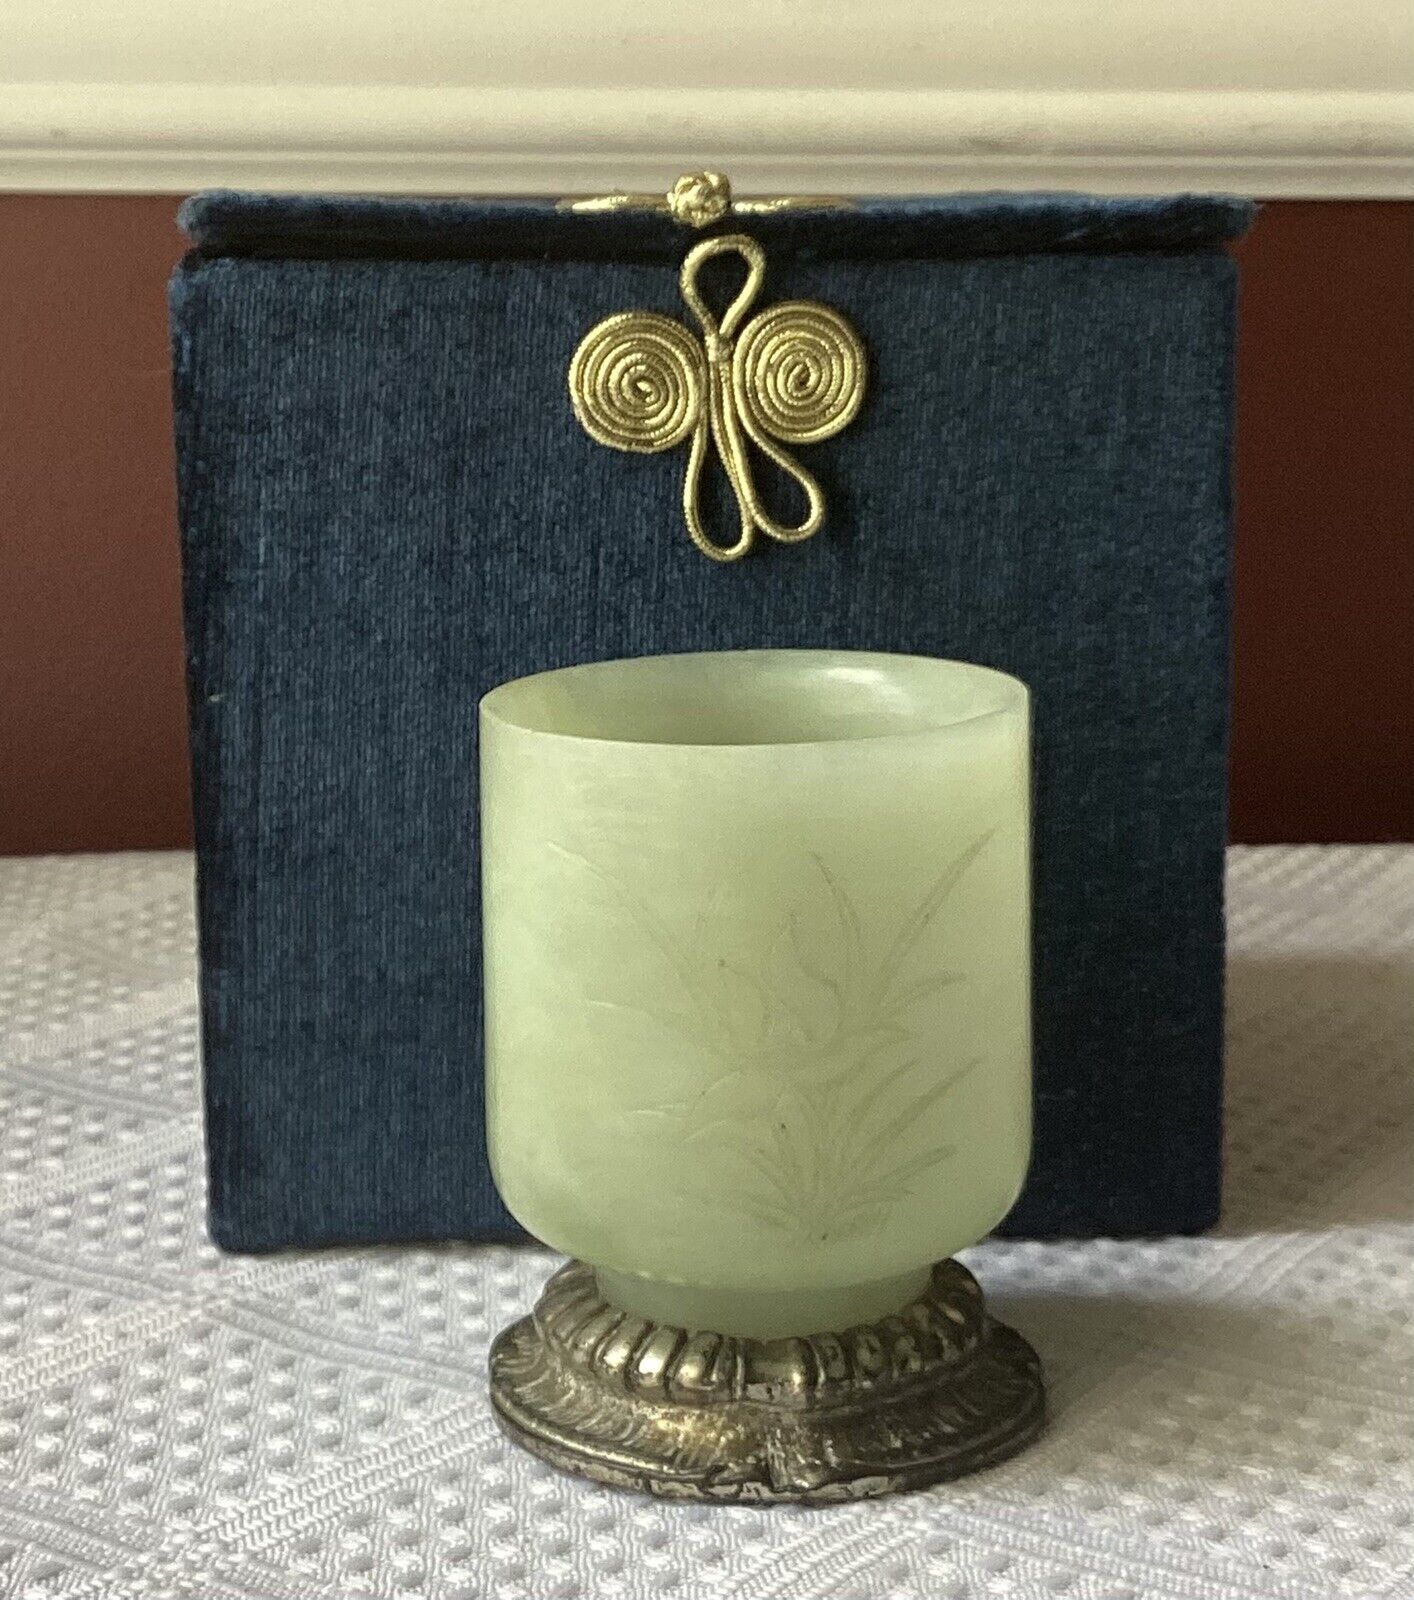 Antique Chinese Jade Cup In Box, 2 5/8” Tall